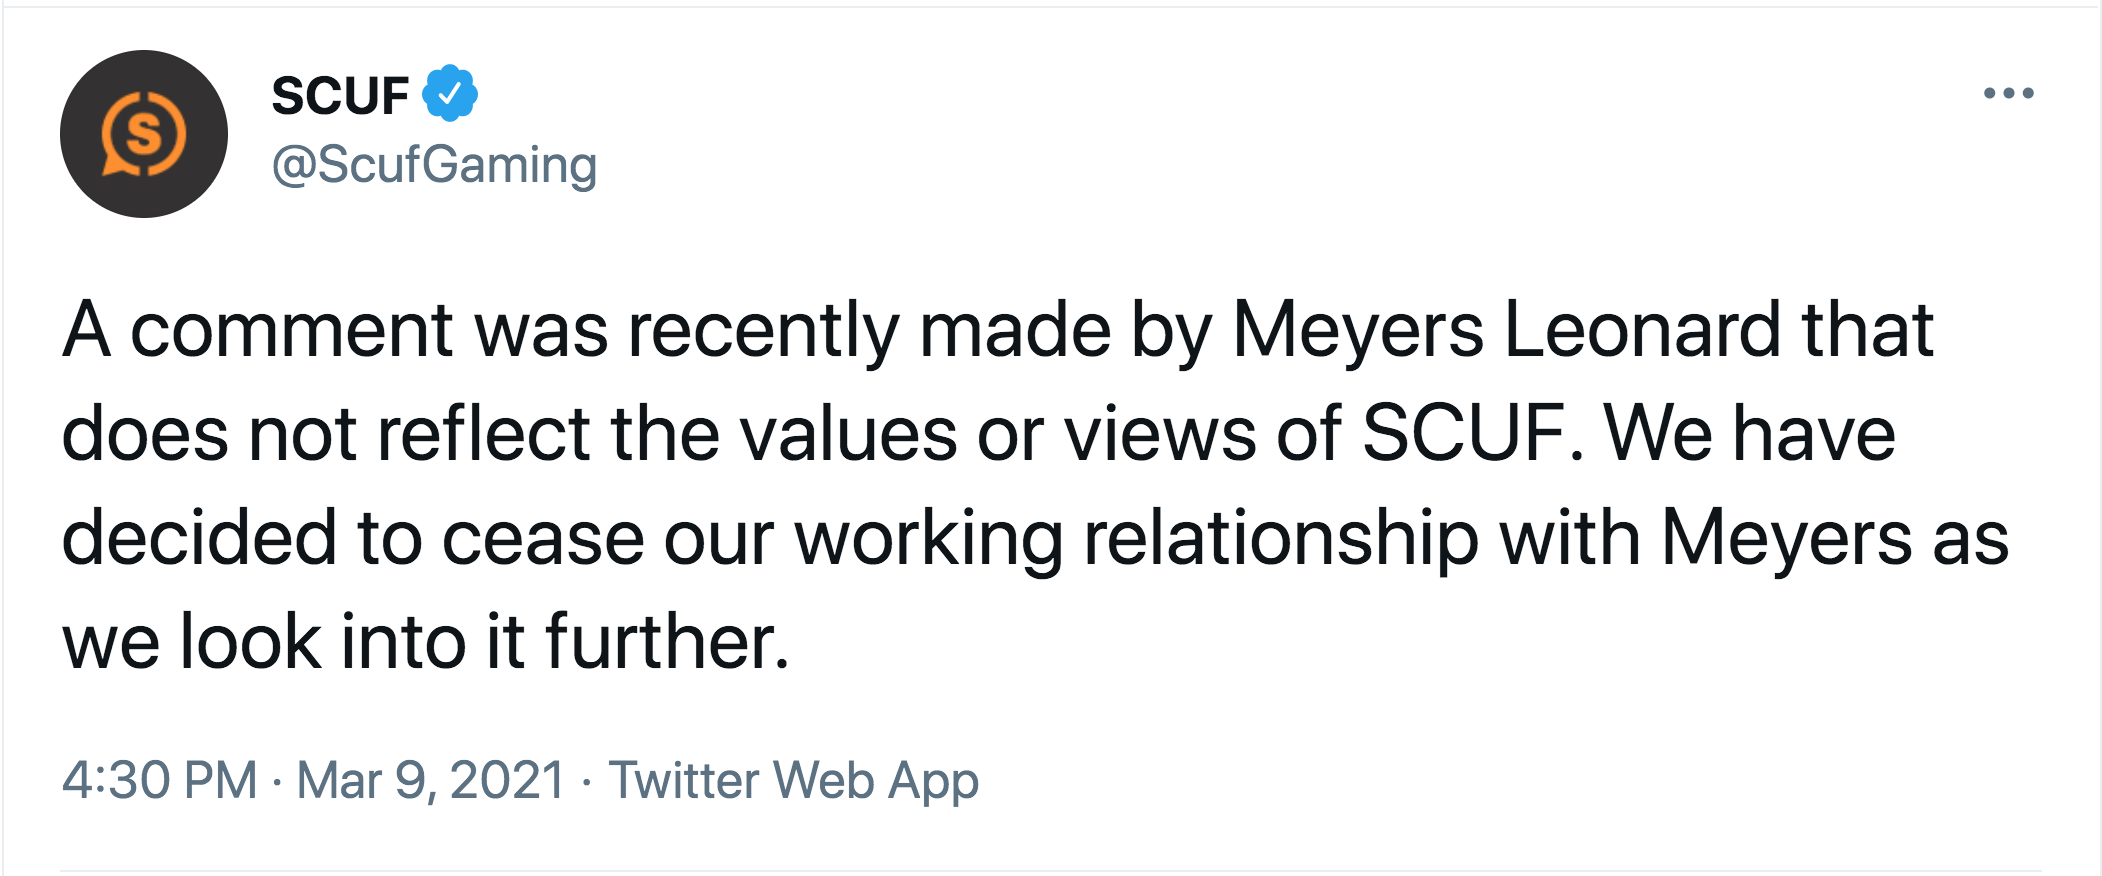 Meyers Leonard Anti-Semitic Slur - me as i am quotes - ... S Scuf A comment was recently made by Meyers Leonard that does not reflect the values or views of Scuf. We have decided to cease our working relationship with Meyers as we look into it further. Tw